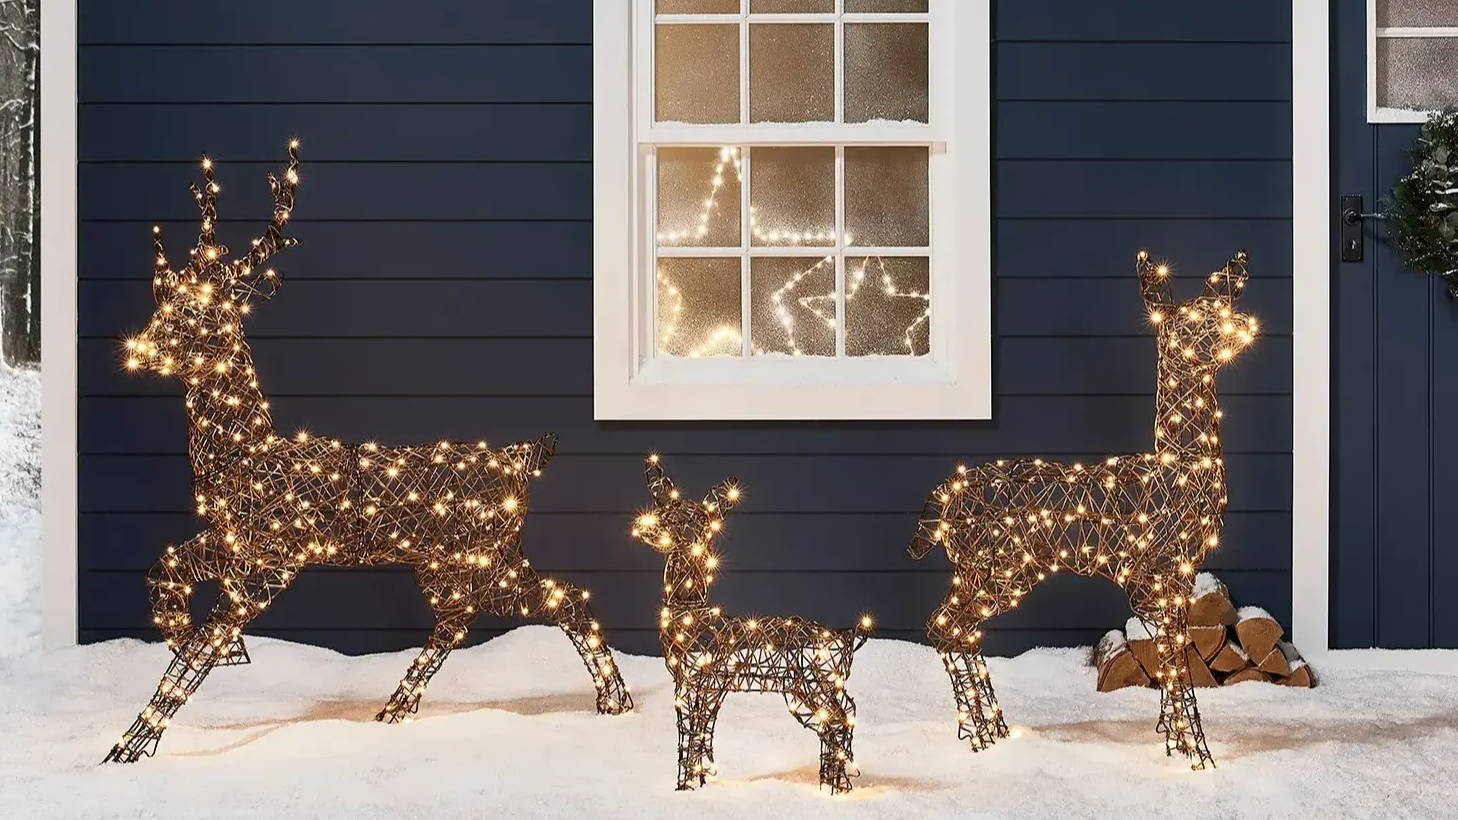 Studley light up reindeer family in a snowy outdoor setting in front of a home.